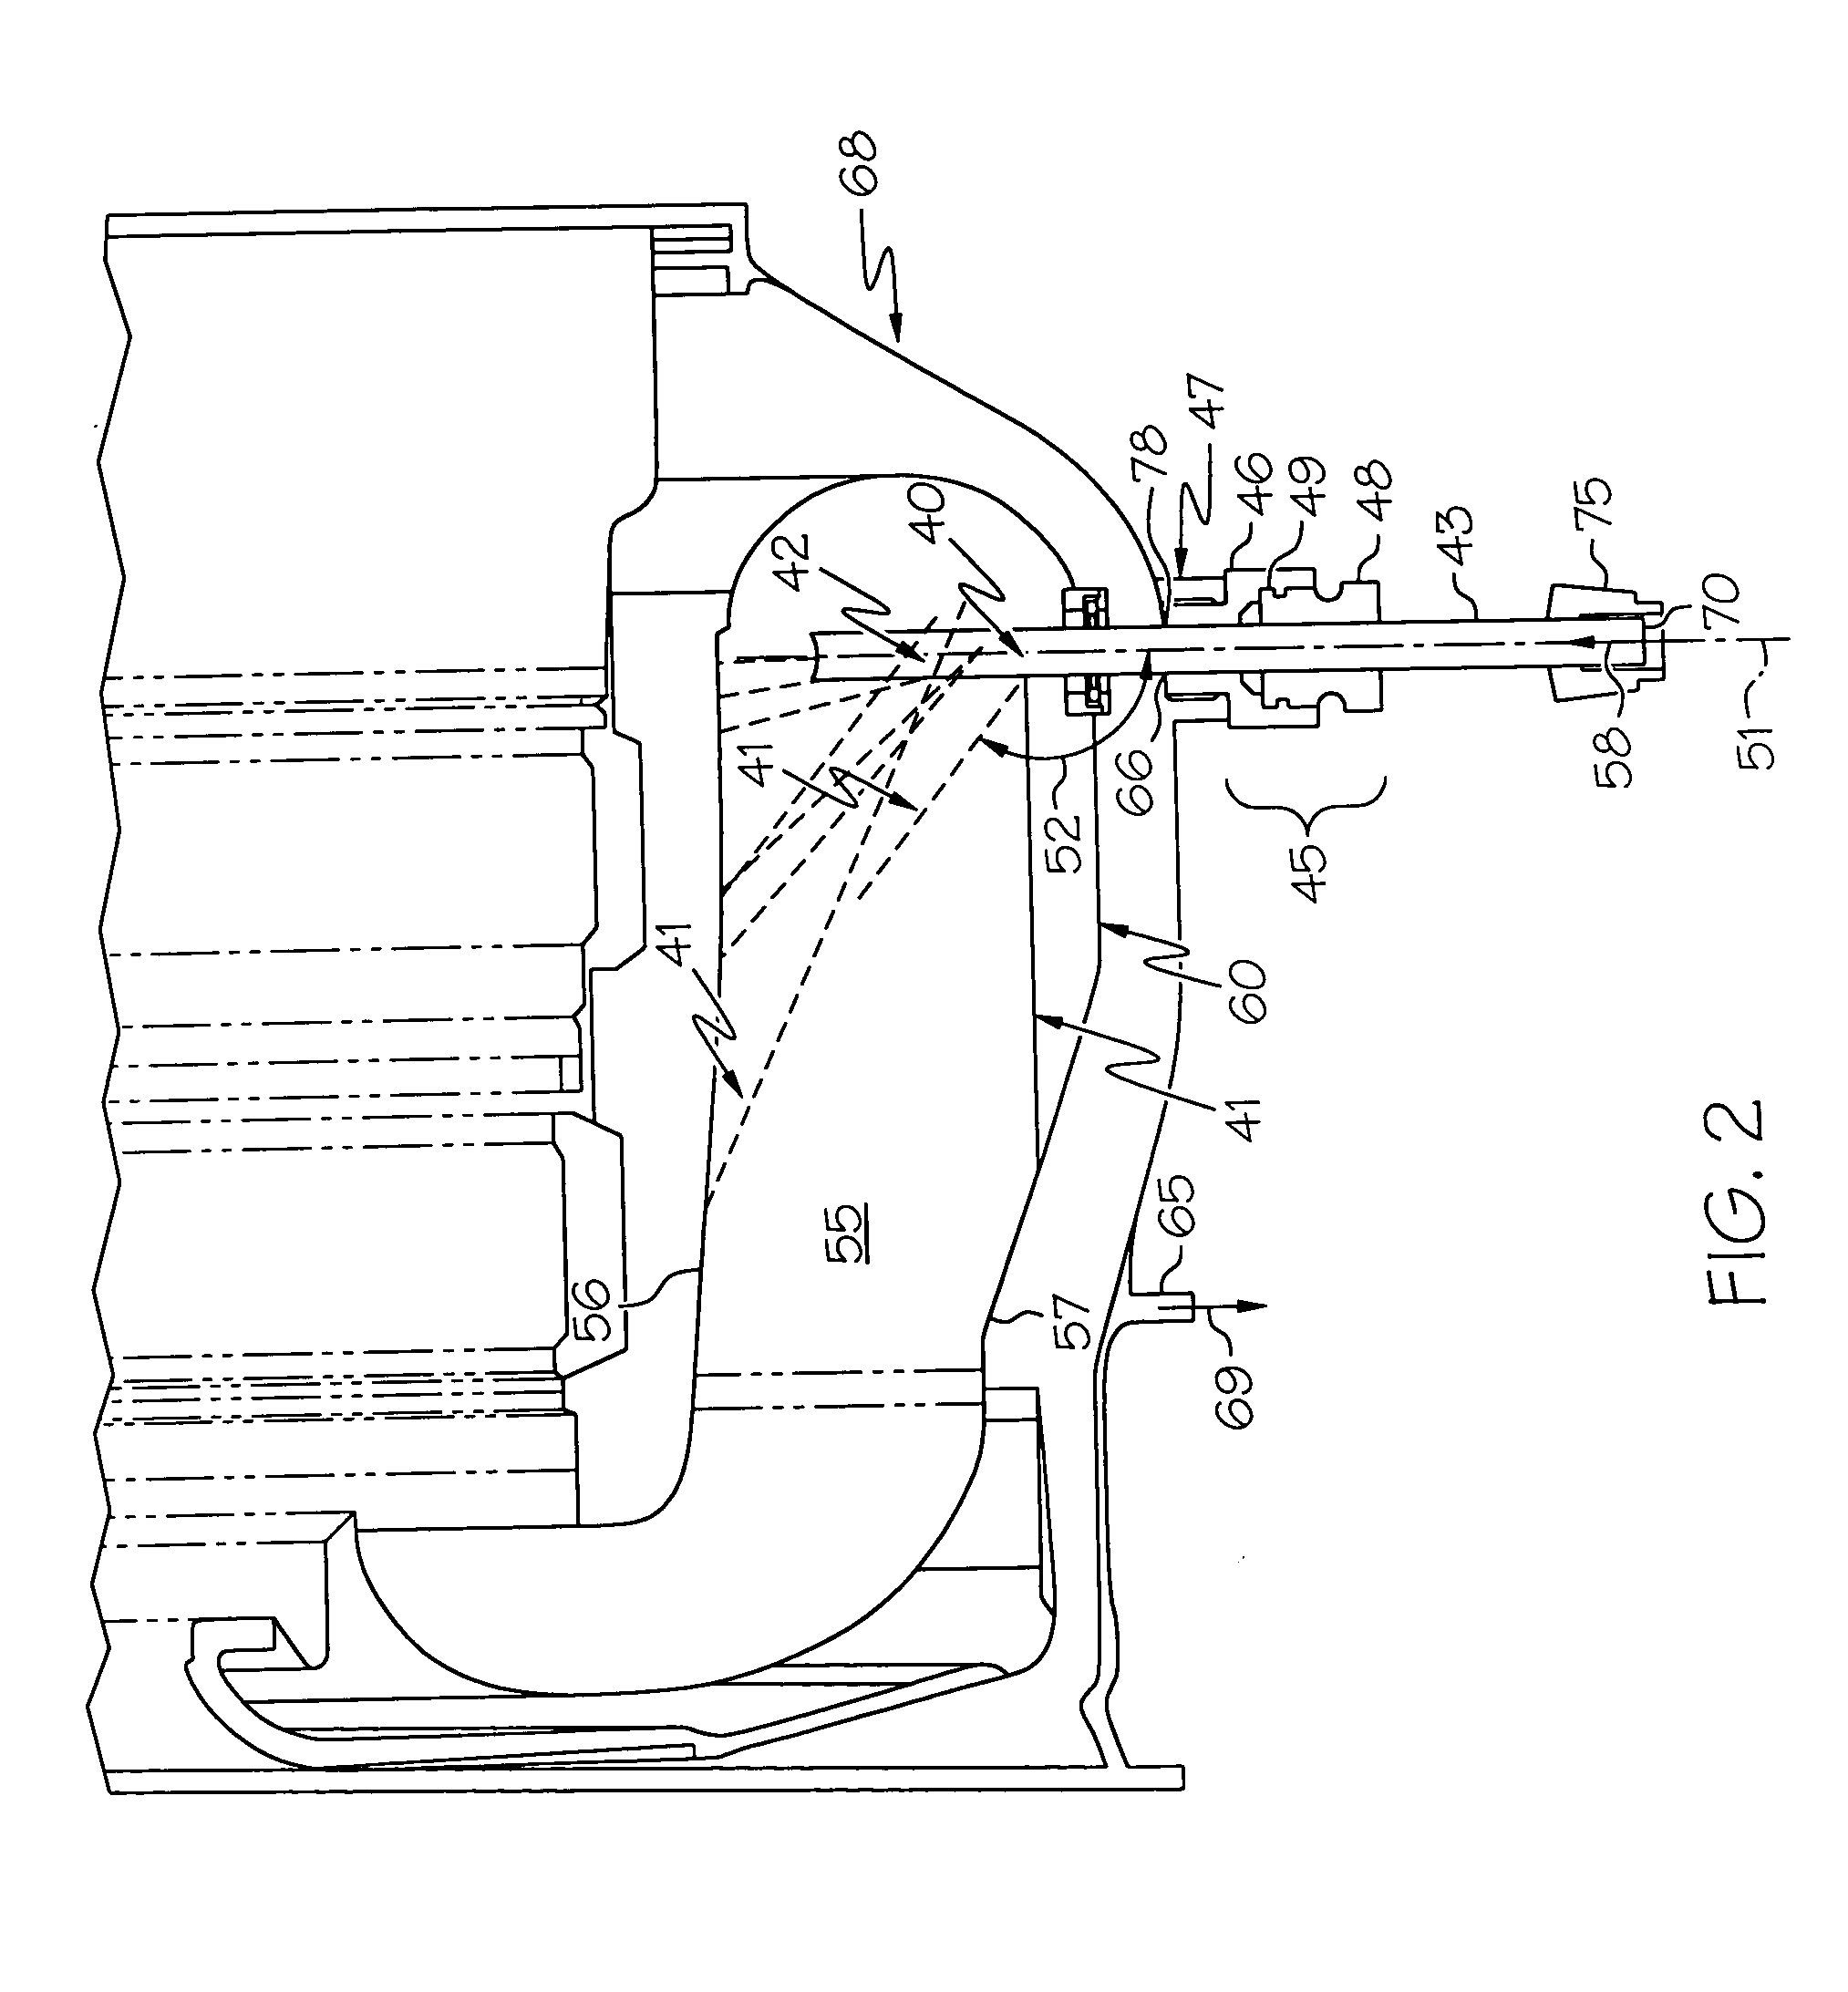 On-wing combustor cleaning using direct insertion nozzle, wash agent, and procedure